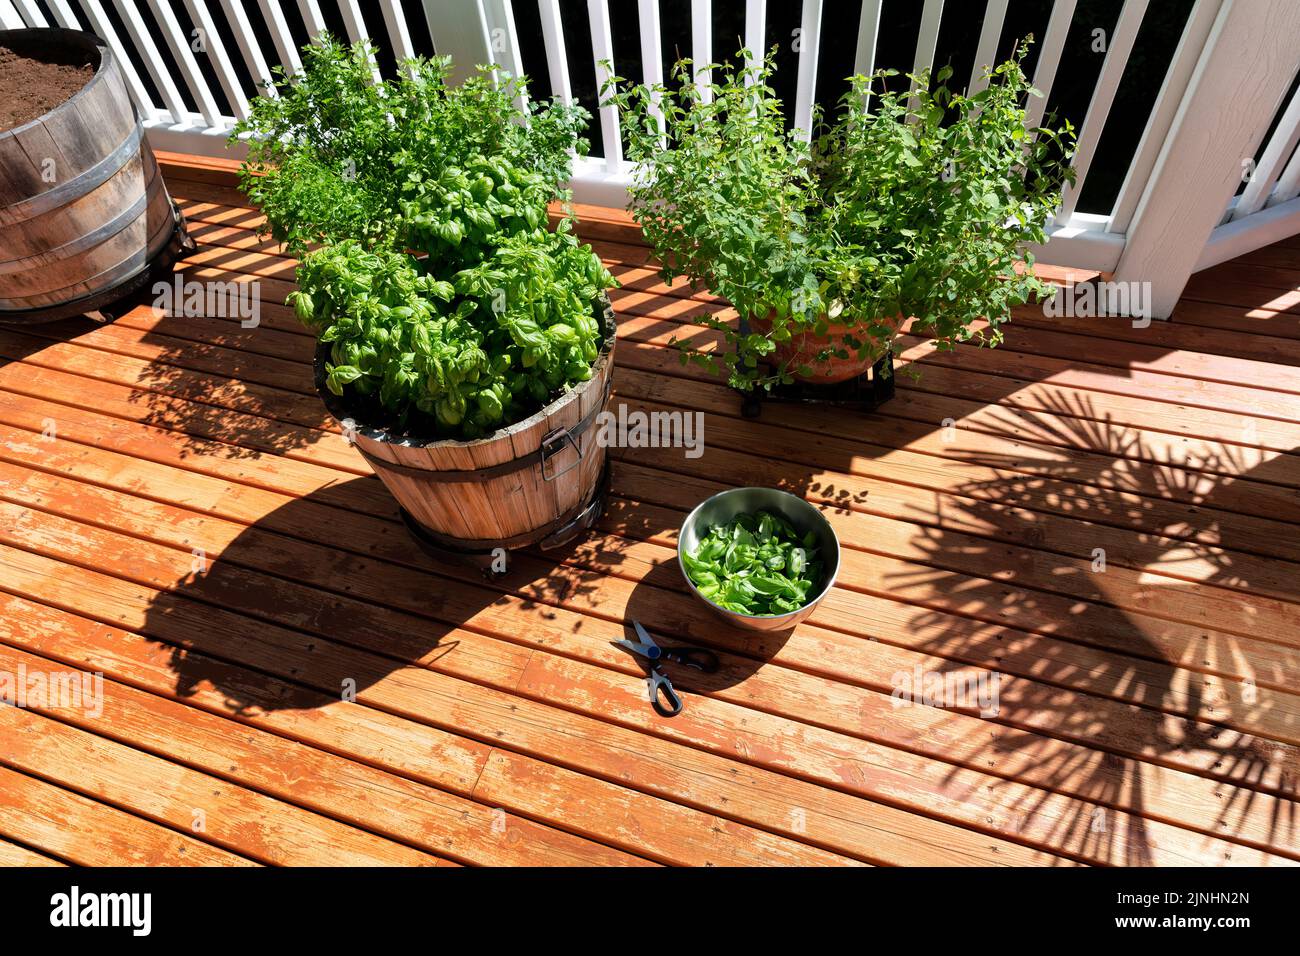 Overhead view of a stainless steel bowl and scissors filled with Italian herbs consisting of basil, oregano, and parsley on home outdoor wood deck bac Stock Photo